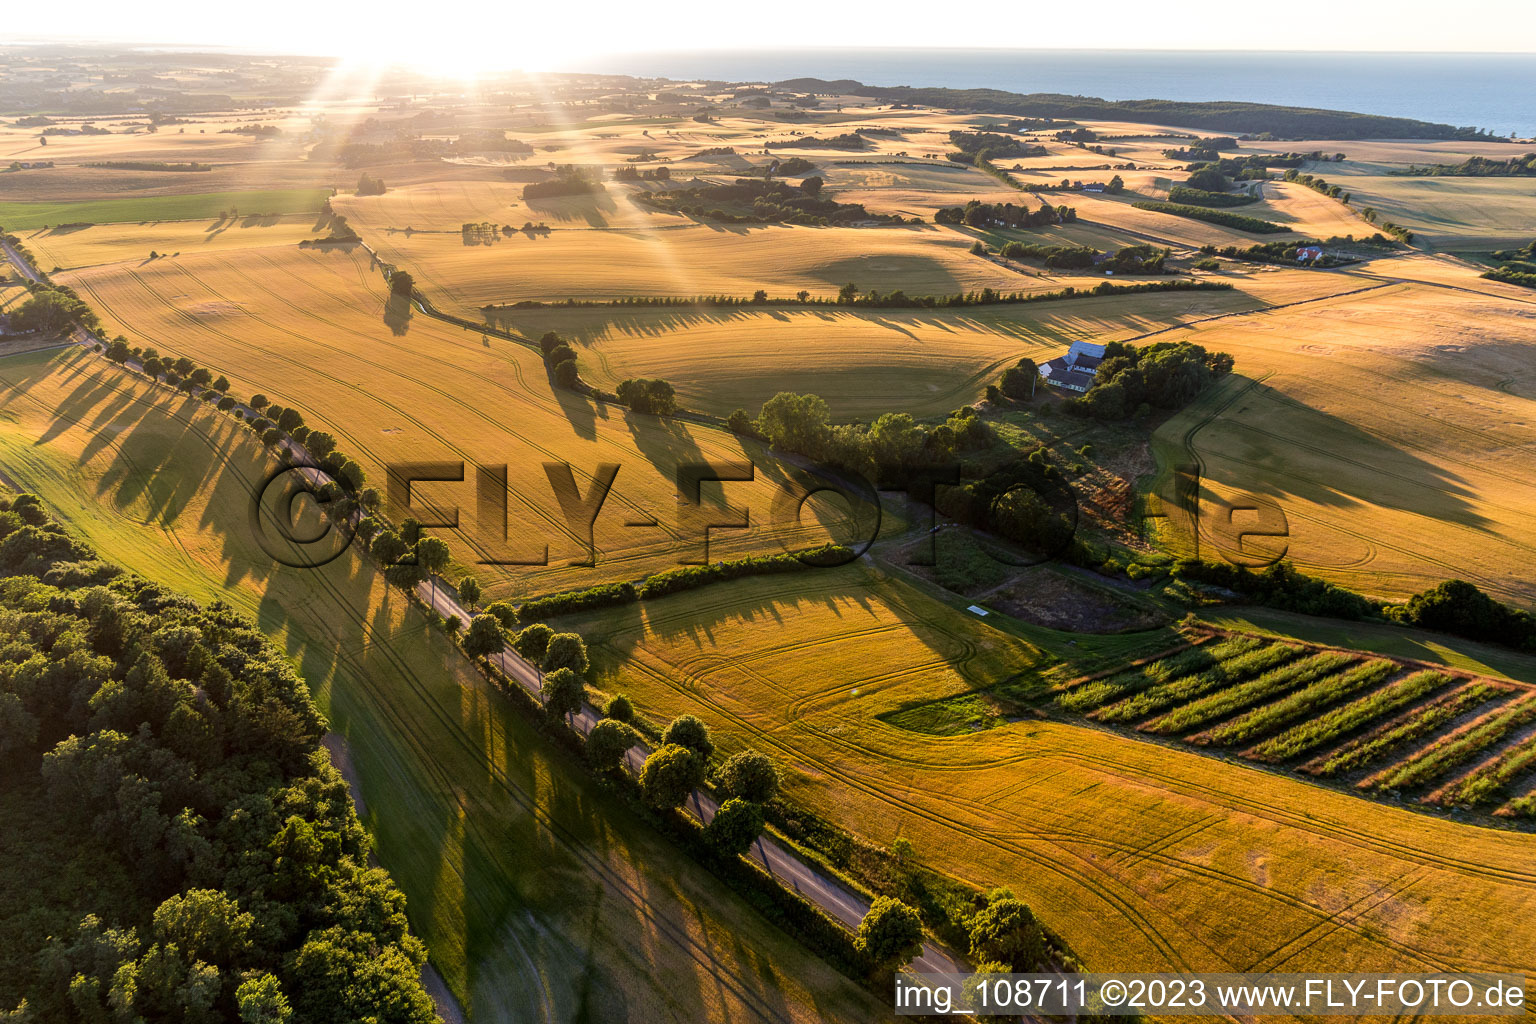 Borre in the state Zealand, Denmark from the drone perspective